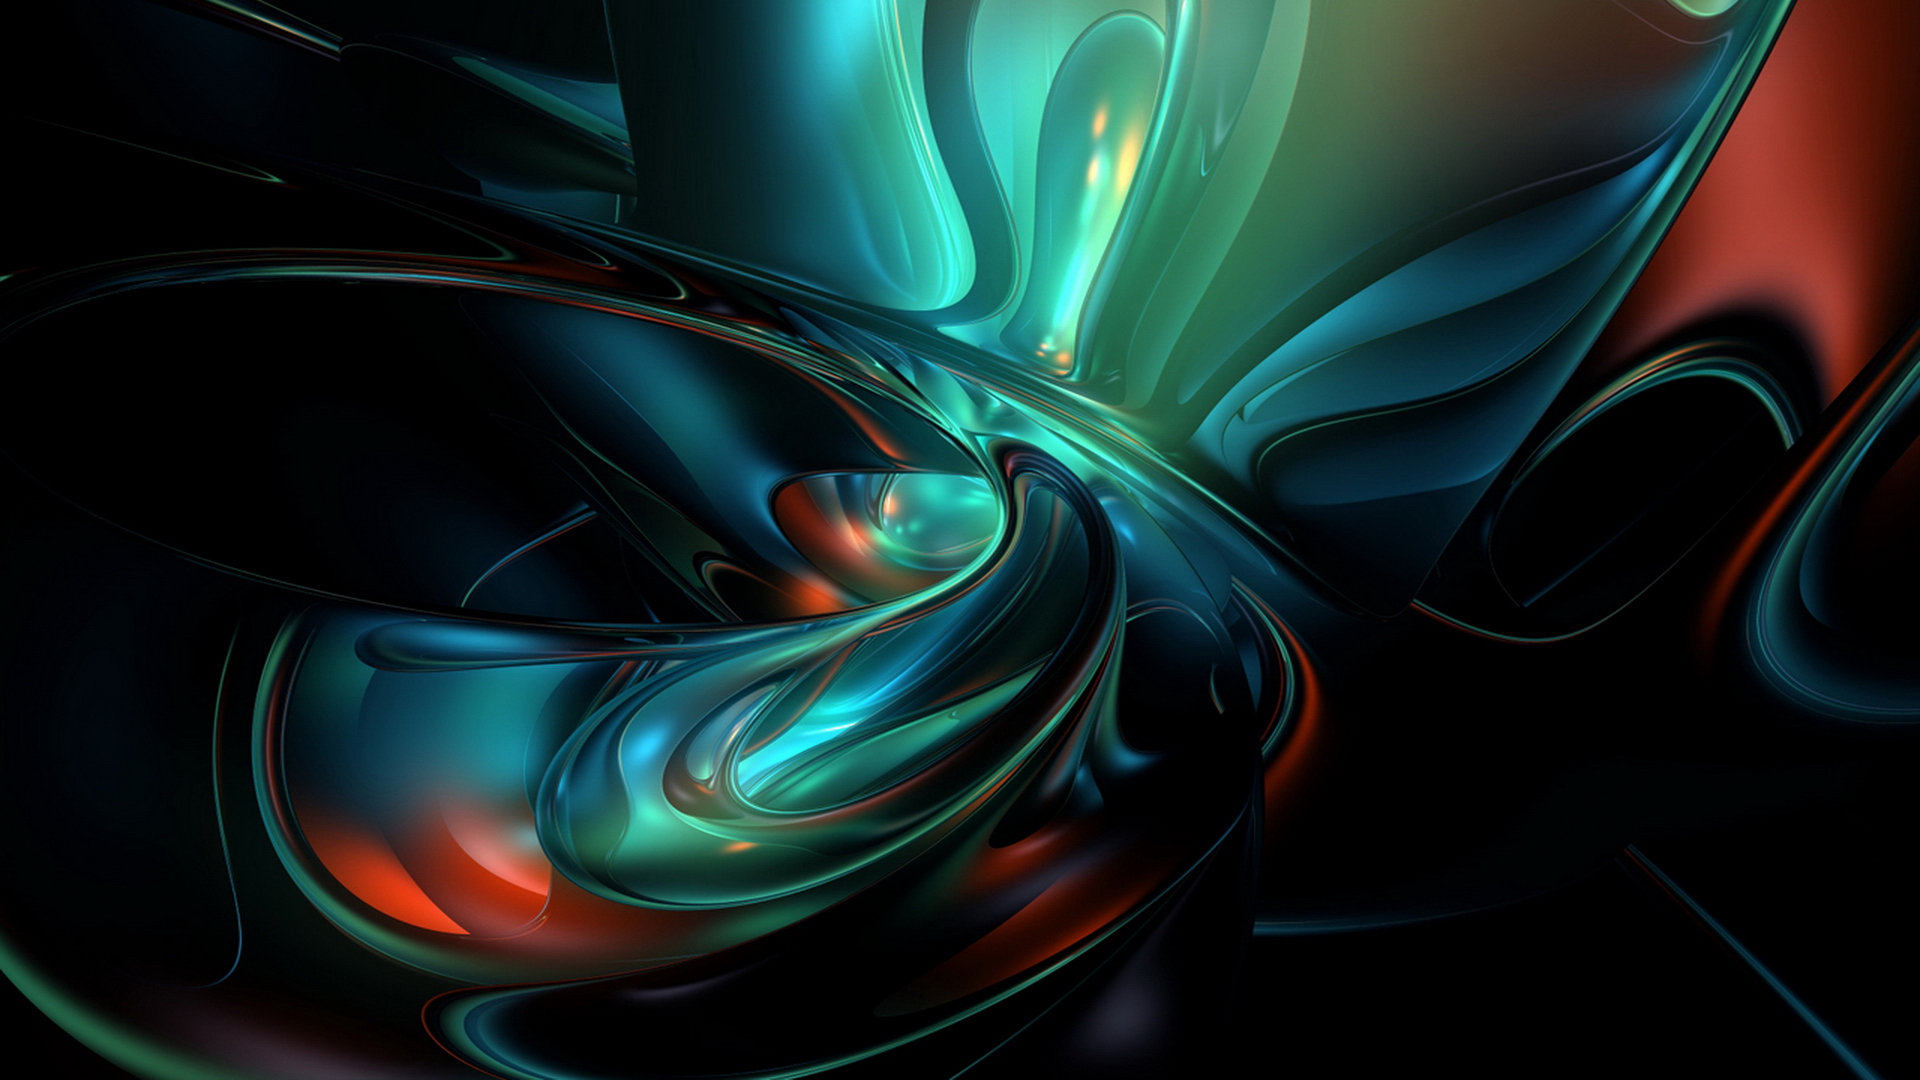  45 HD Abstract  Wallpaper  Widescreen 1920x1080  on 